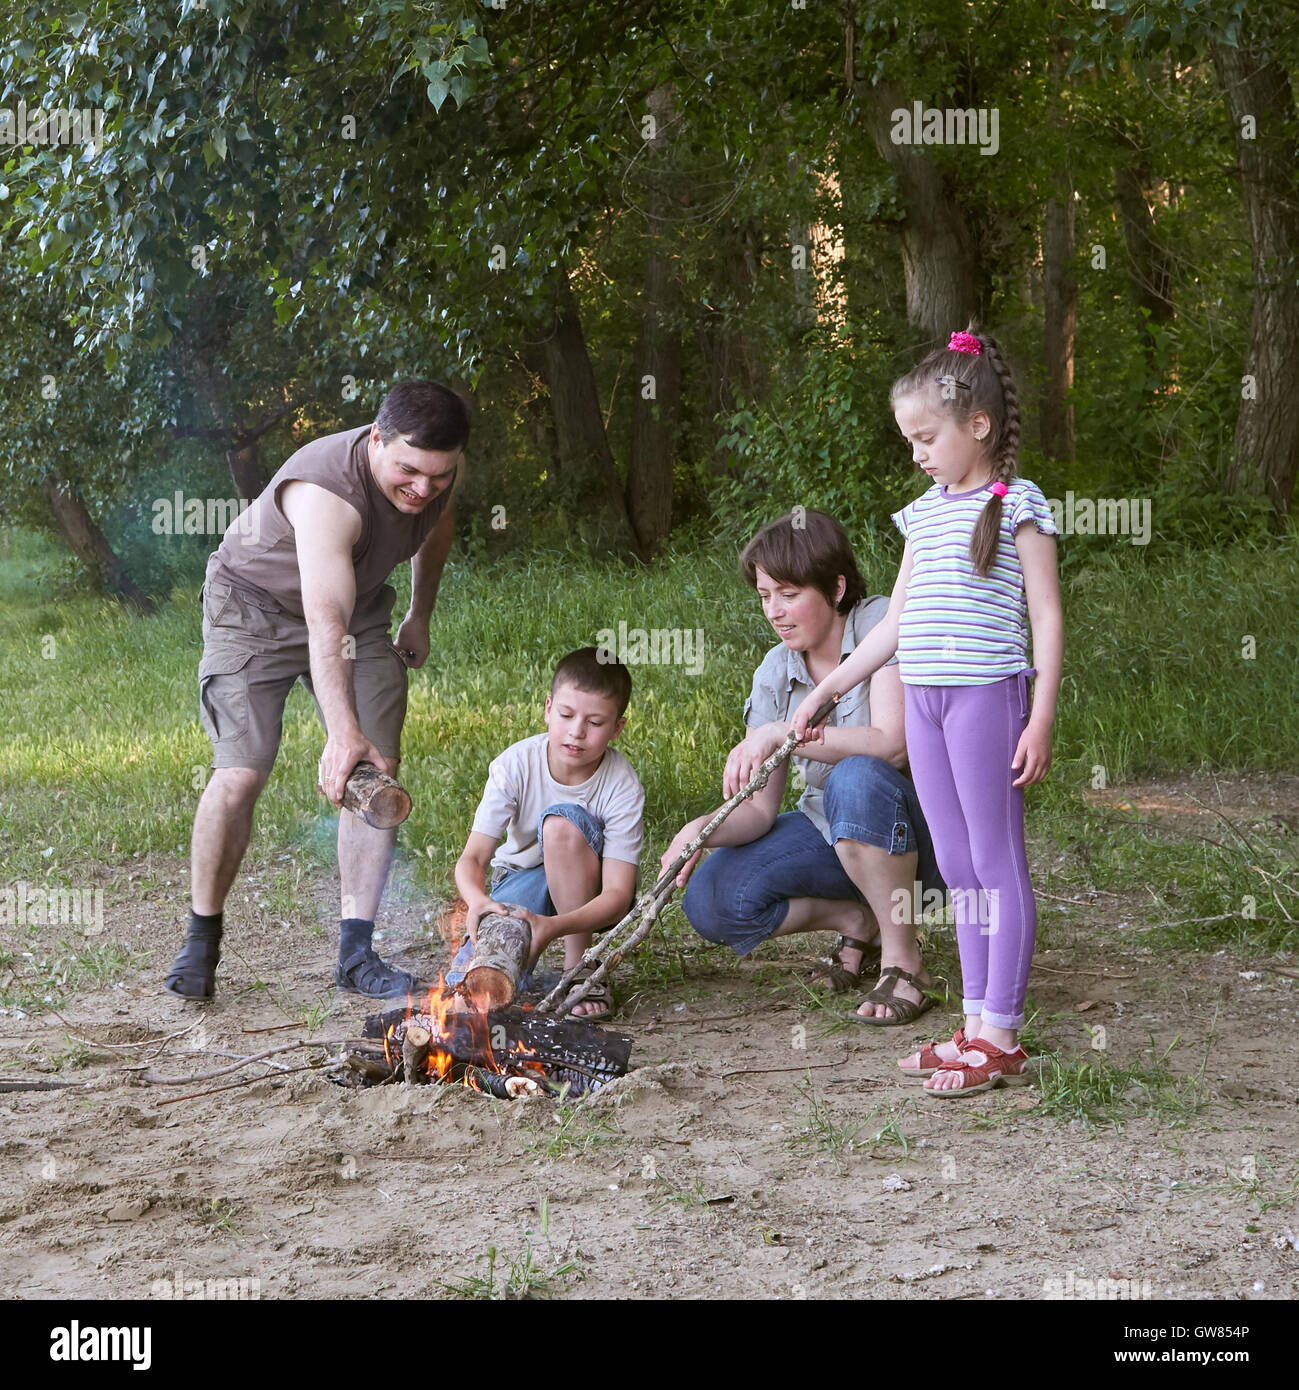 people camping in forest, family active in nature, kindle fire, summer season Stock Photo